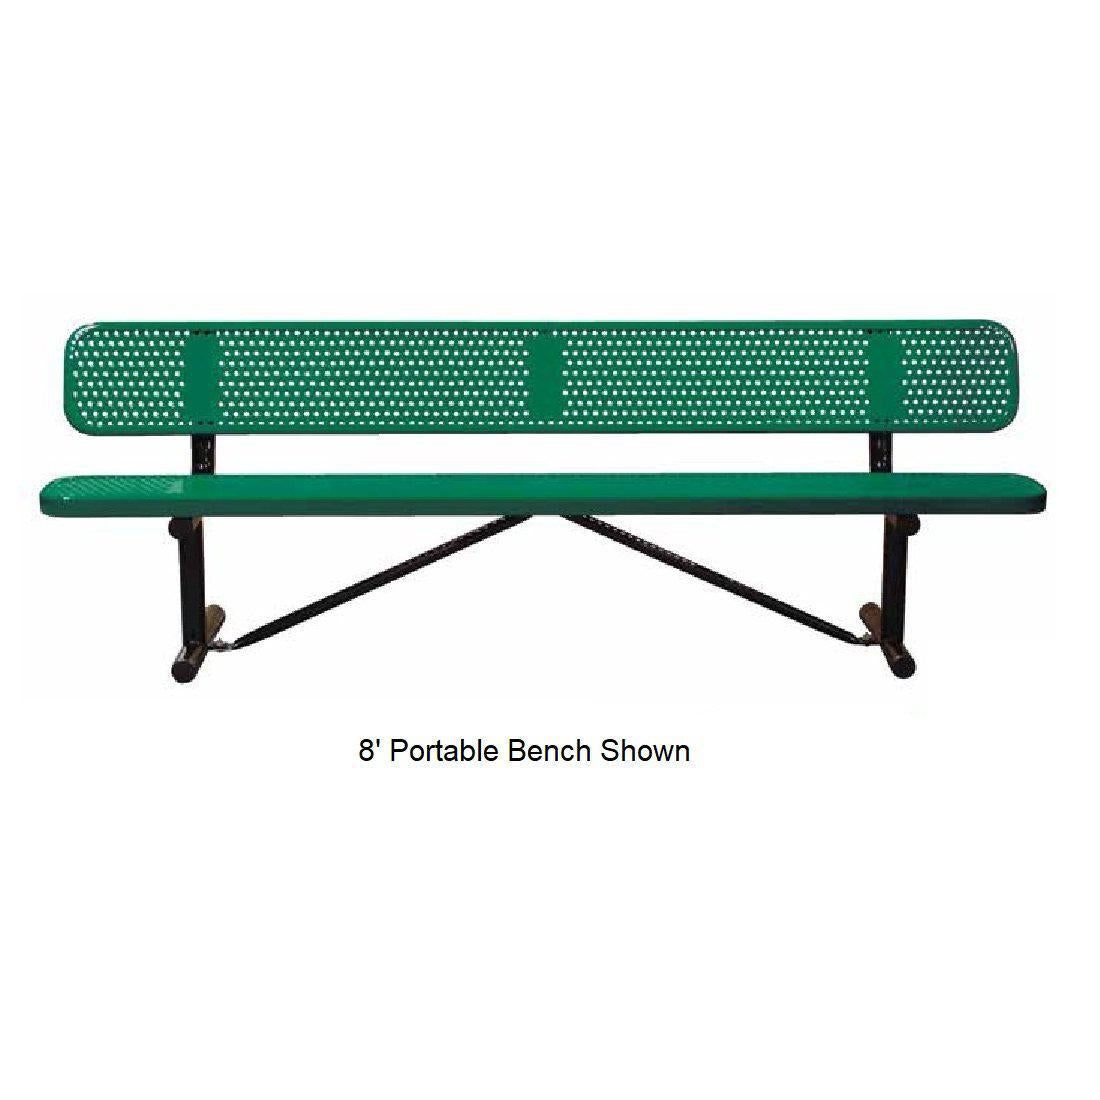 10’ Standard Perforated Bench With Back, Surface Mount